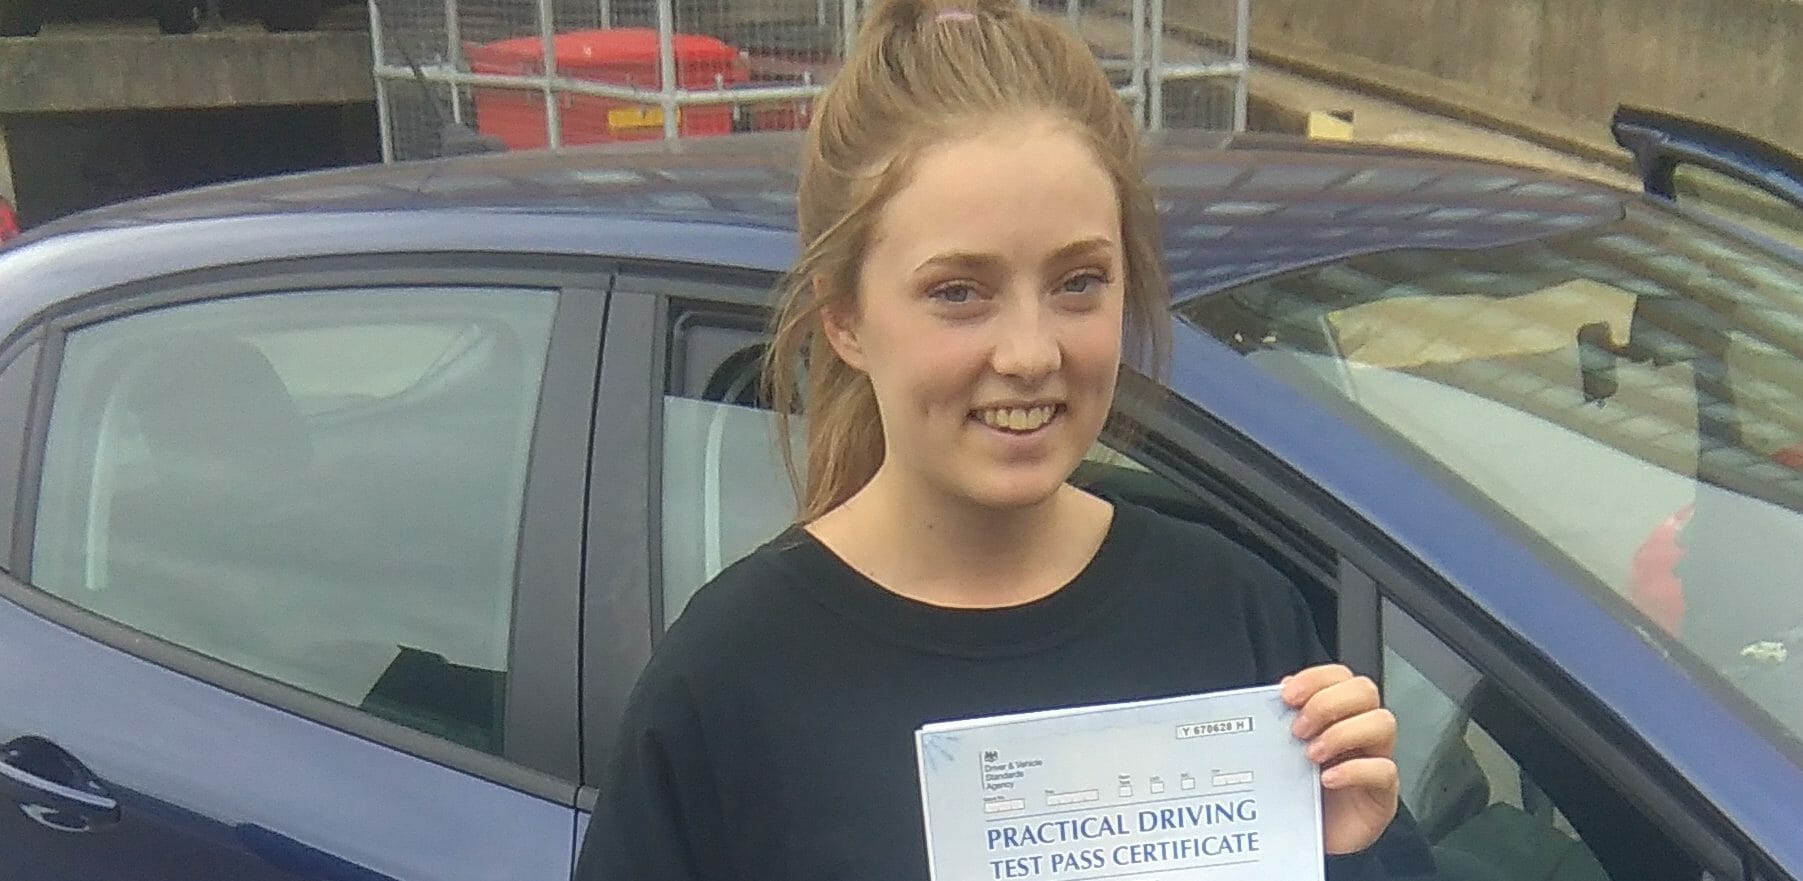 First Time Pass!! Well done to Nikita of Worthing.